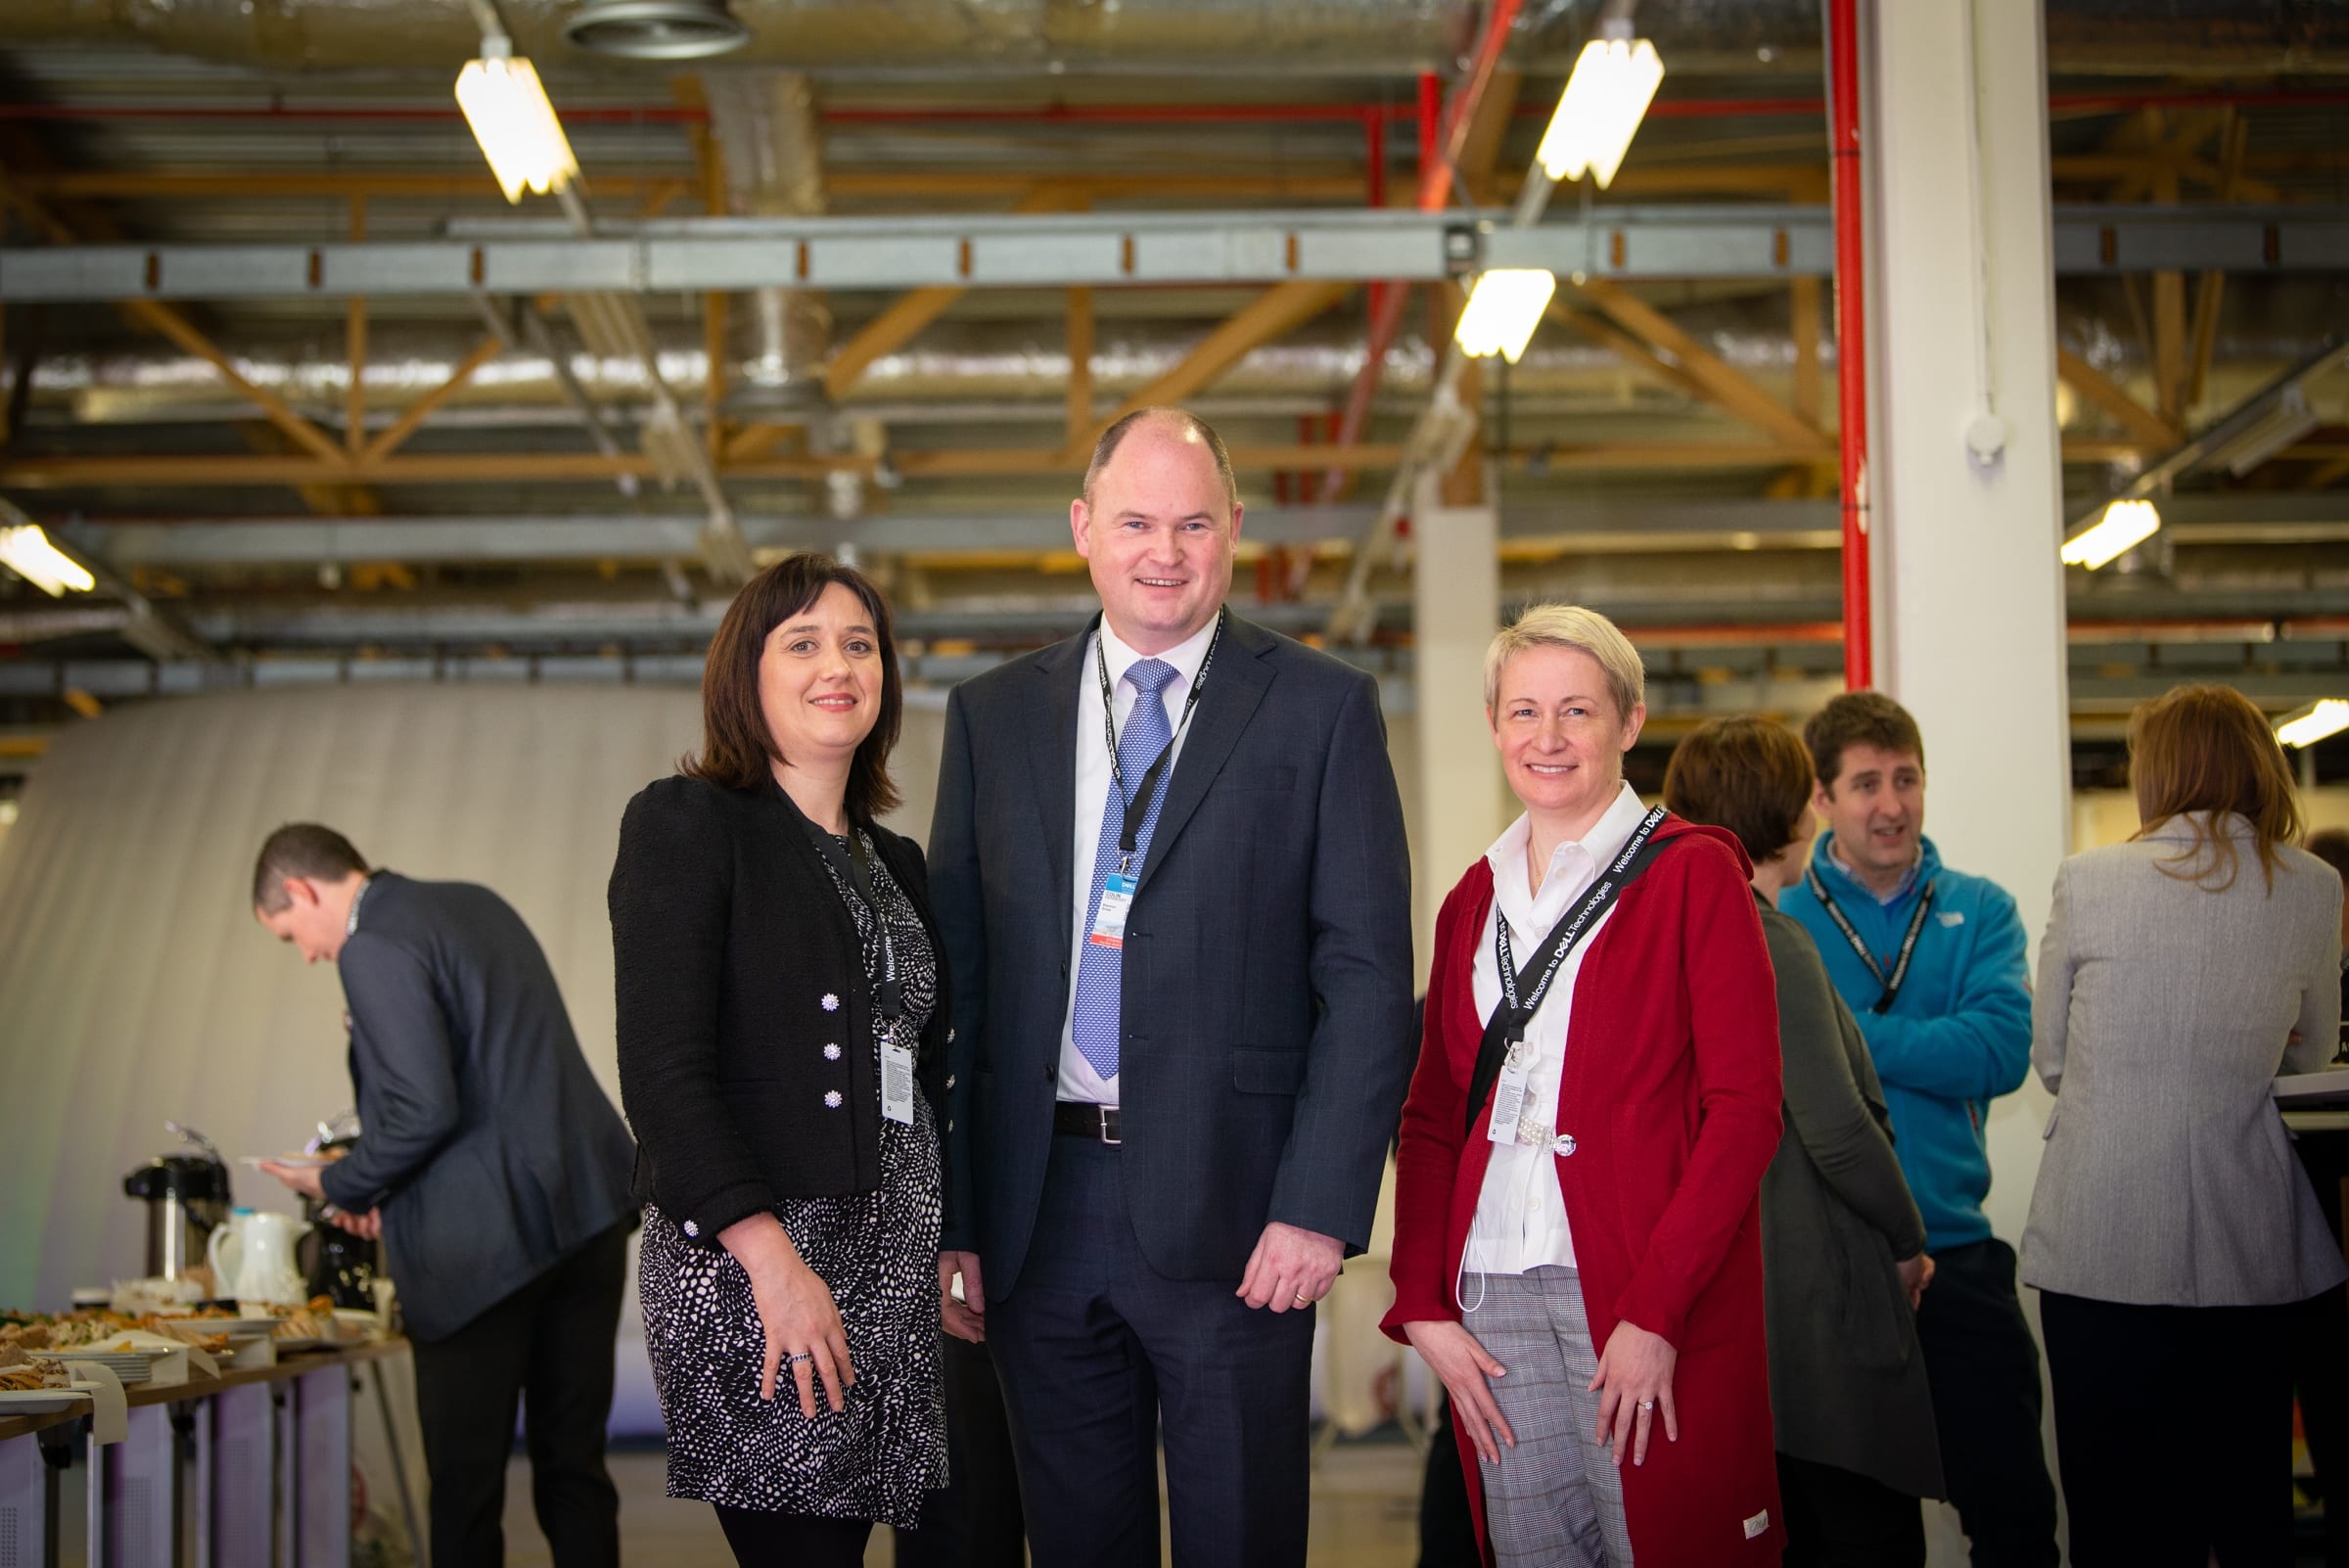 No repro fee-RLP Programme Launch which was held in DELL EMC, Raheen Industrial Est Limerick on Thursday 6th February - From Left to Right: Nicola Flynn- Shannon Group, Colin Hennessy - Shannon Heritage, Mary Ahern - Shannon Ahern. 
Photo credit Shauna Kennedy